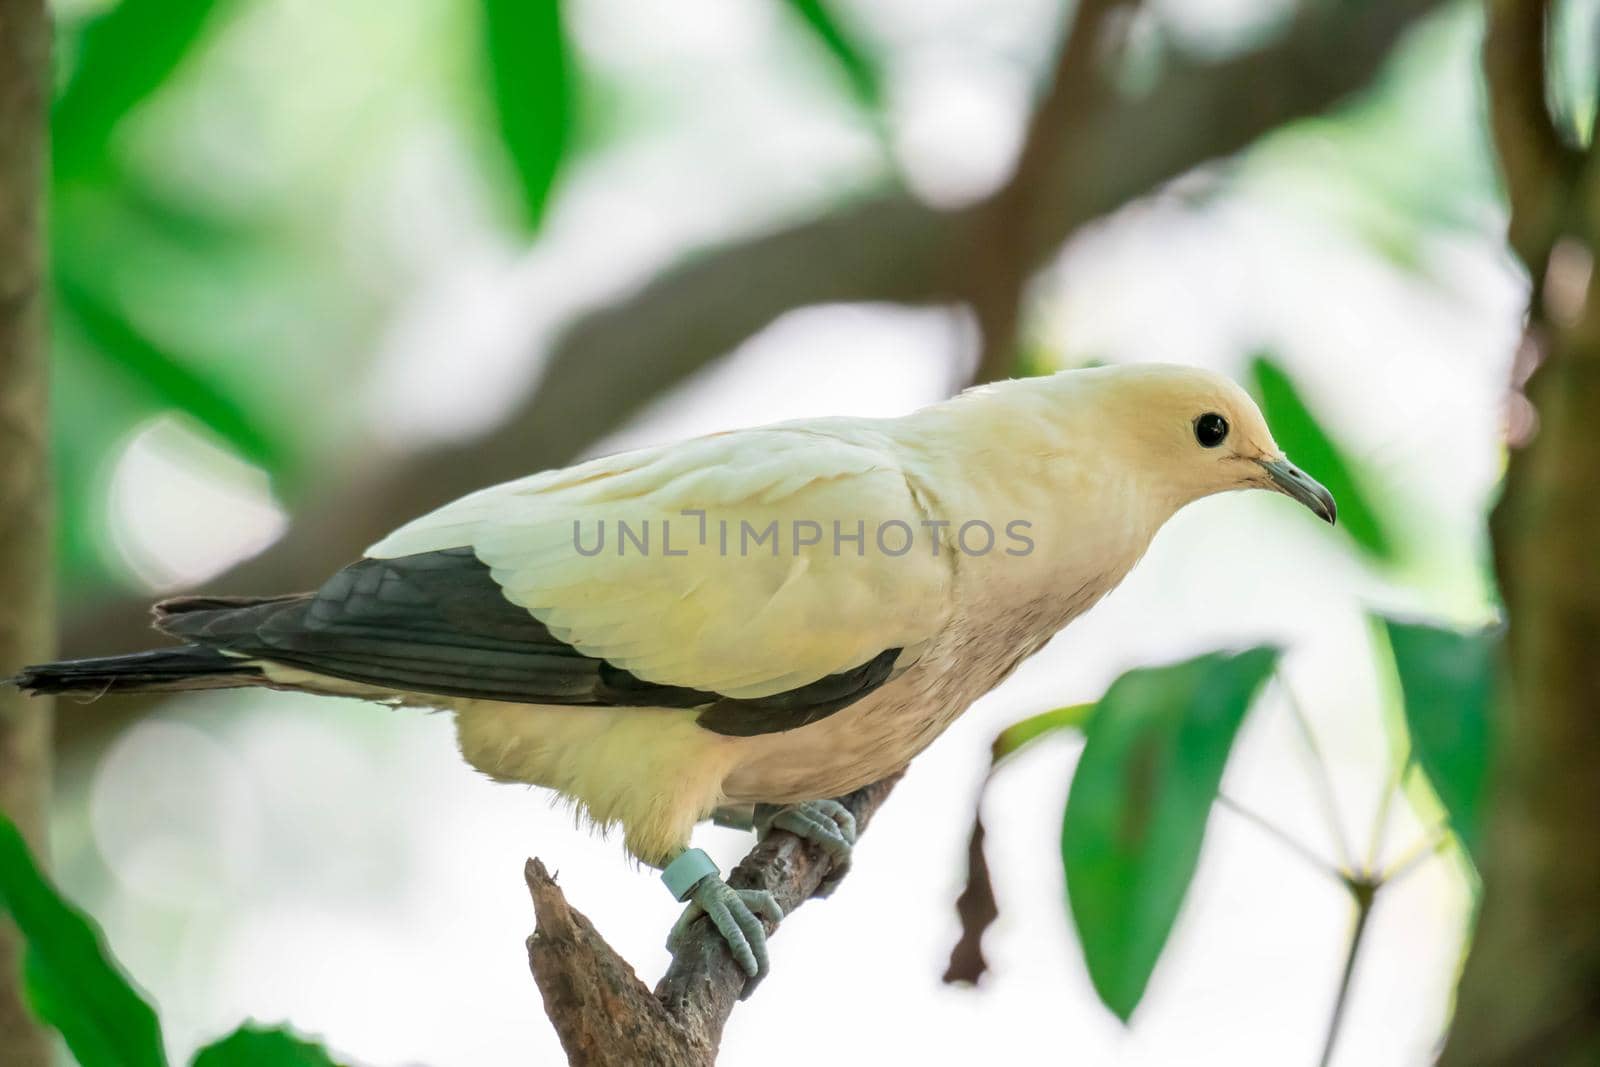 The Pied imperial pigeon (Ducula bicolor)stand on the branch. It is a relatively large, pied species of pigeon. It is found in forest, woodland, mangrove, plantations and scrub in Southeast Asia by billroque